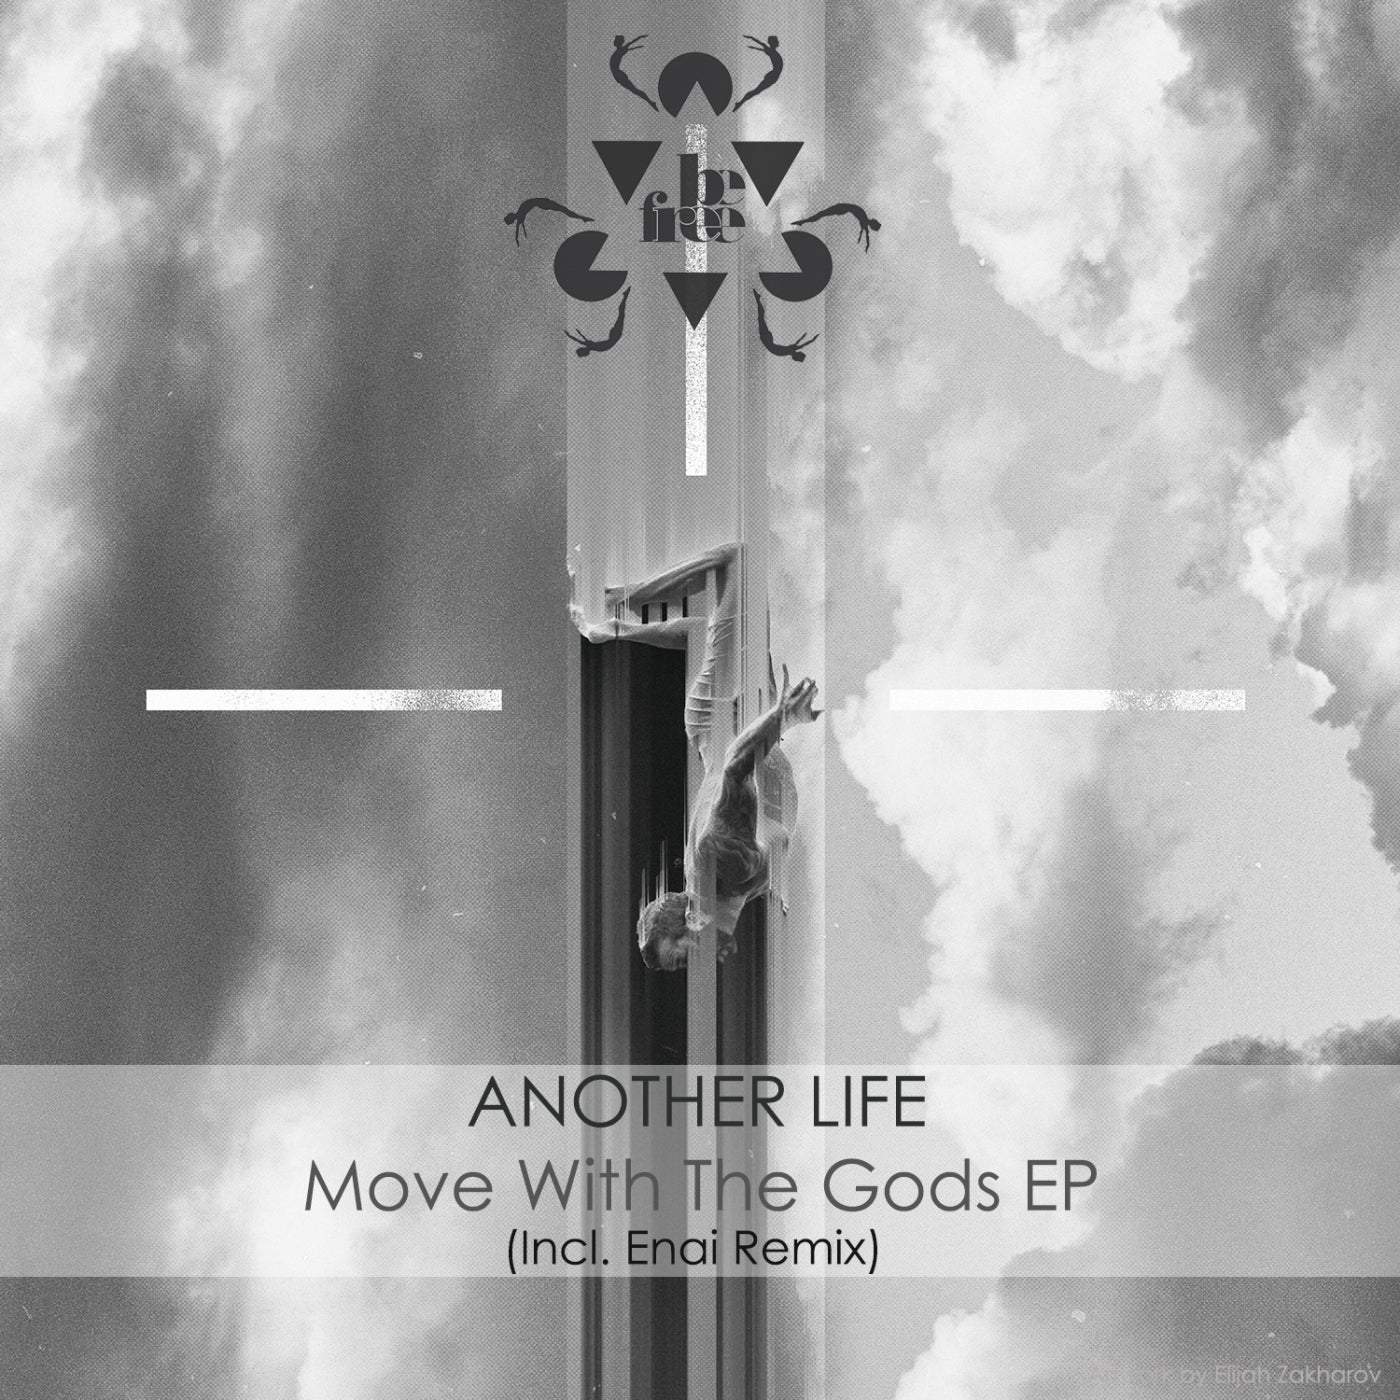 Download Another Life - Move With The Gods EP